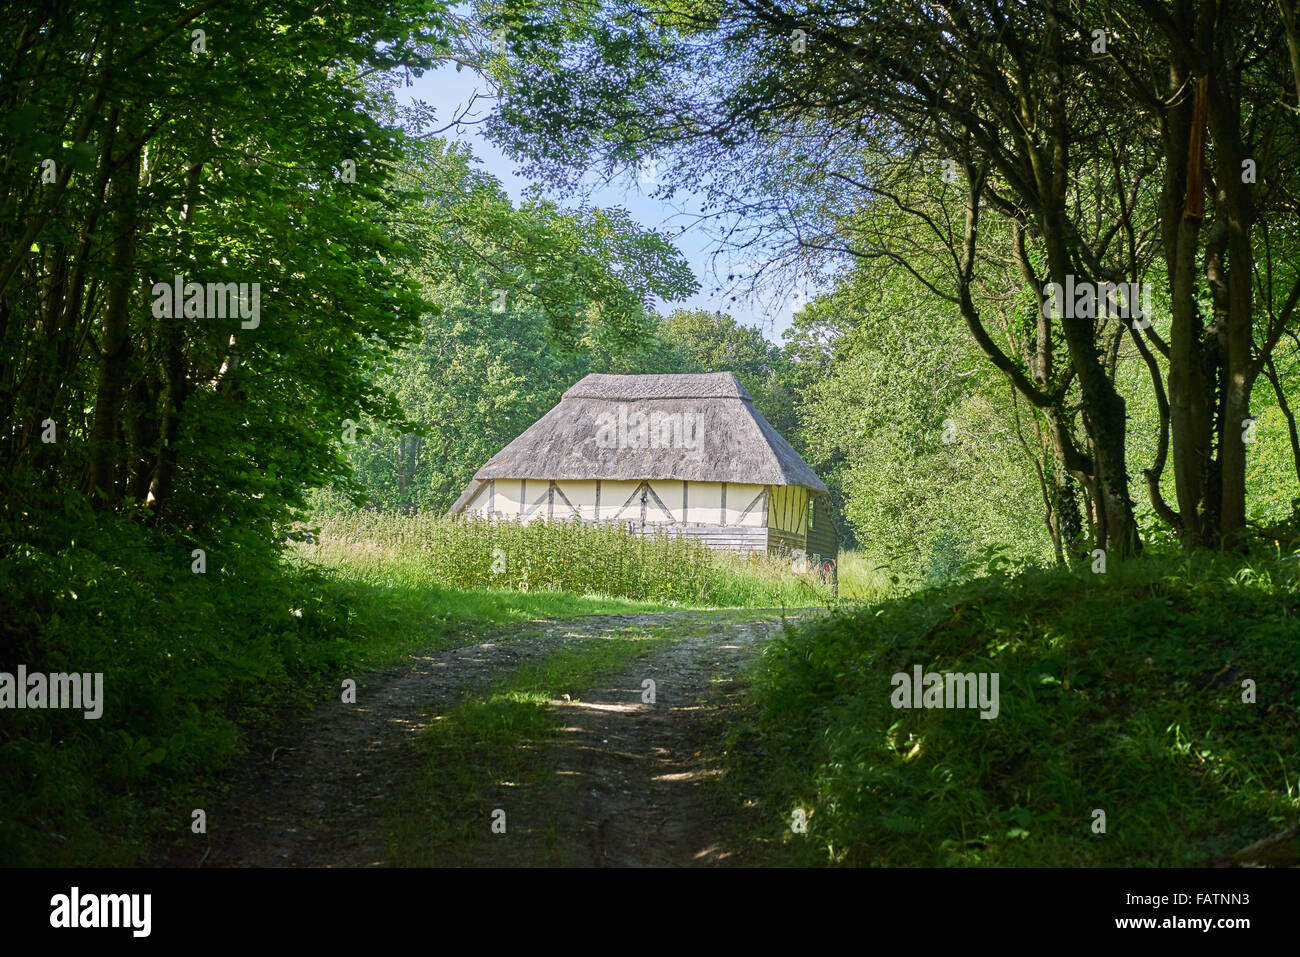 Traditional, historical farm or farmstead building of the High Weald AONB Stock Photo